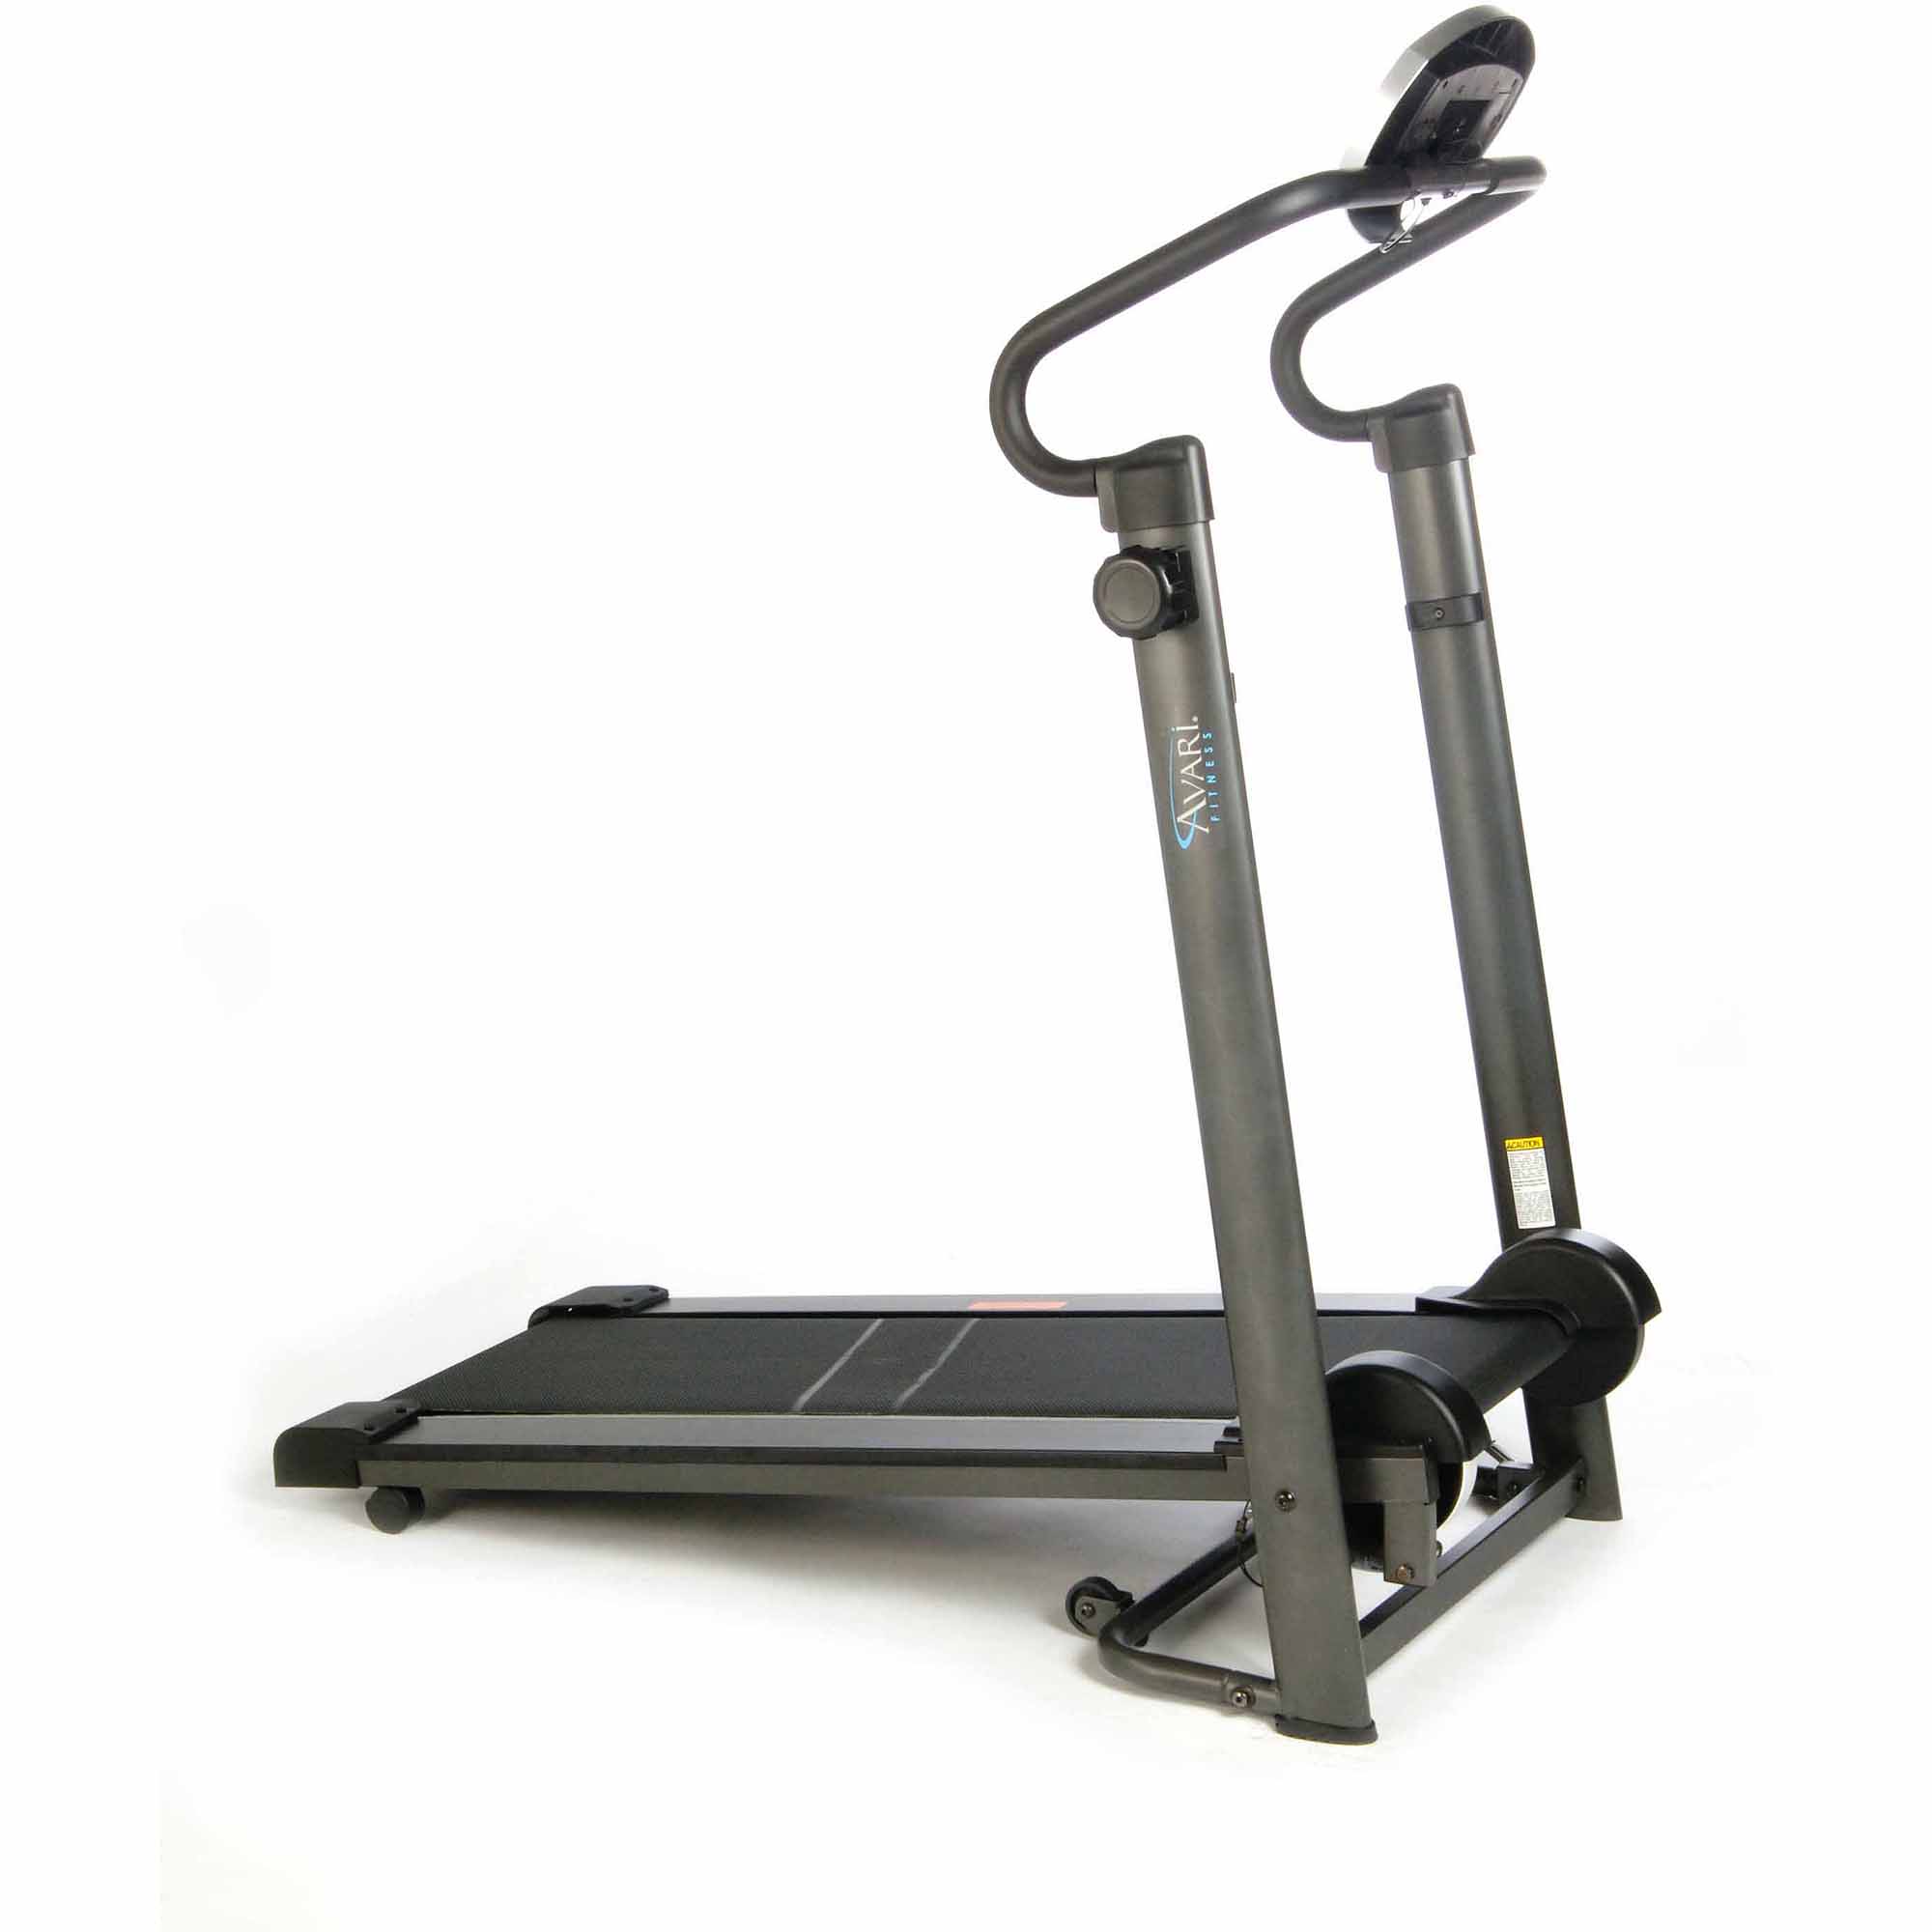 Stamina Products A450-255 Avari Non Electric Magnetic Resistance Treadmill - image 9 of 9